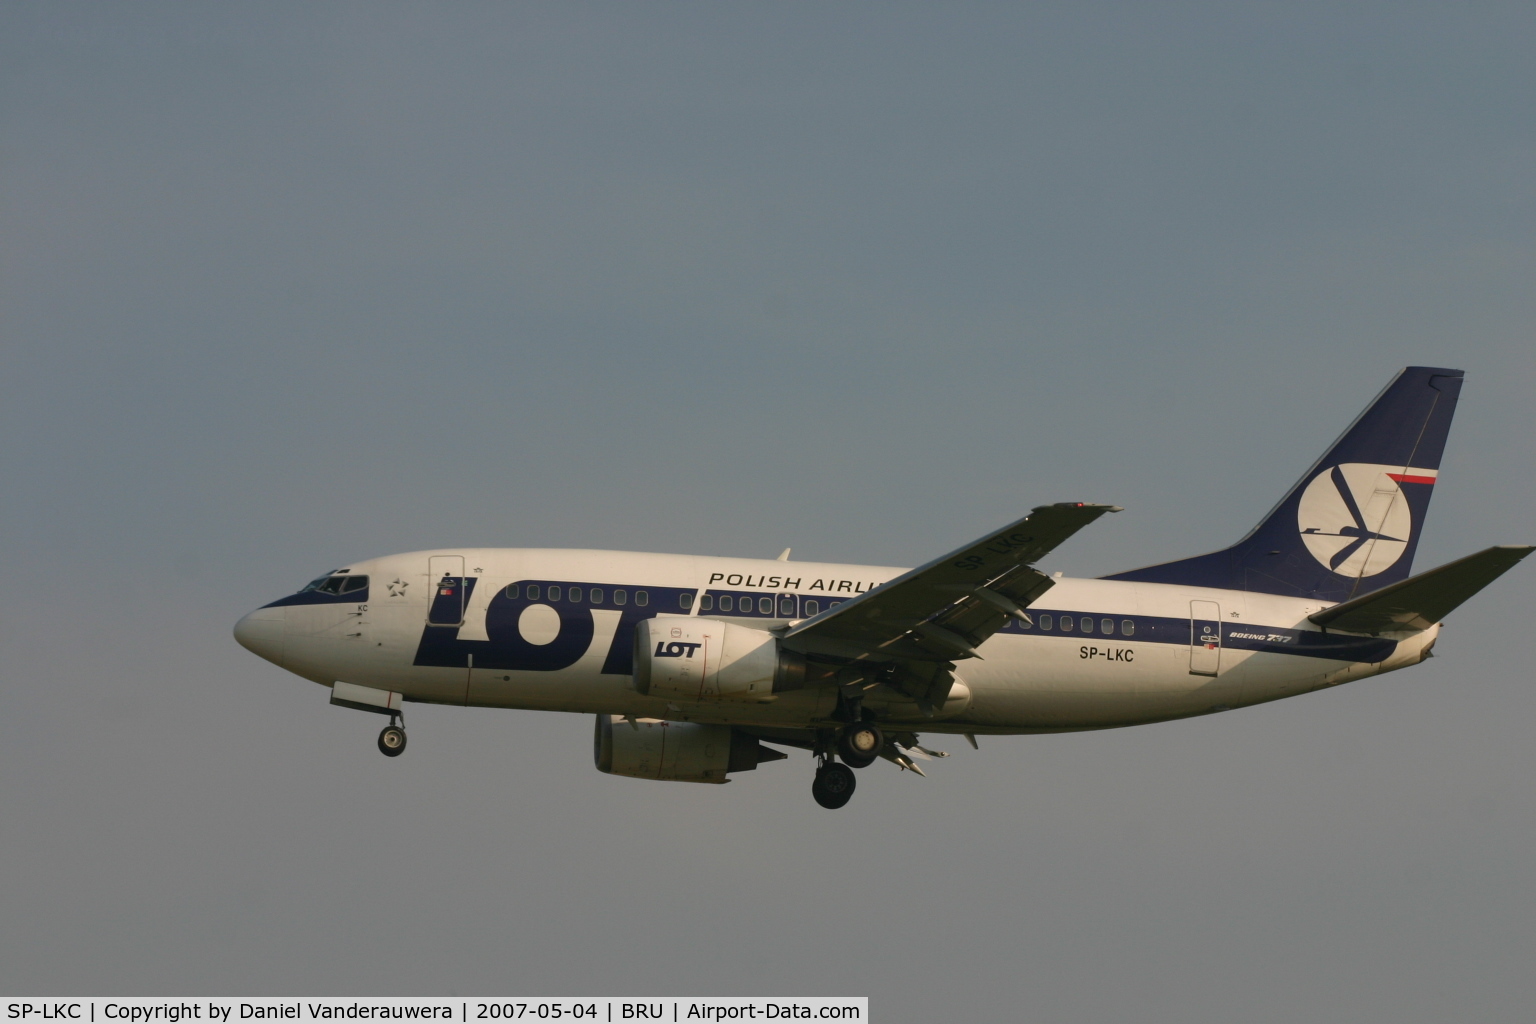 SP-LKC, 1992 Boeing 737-55D C/N 27418, arrival of flight LO235 from WAW